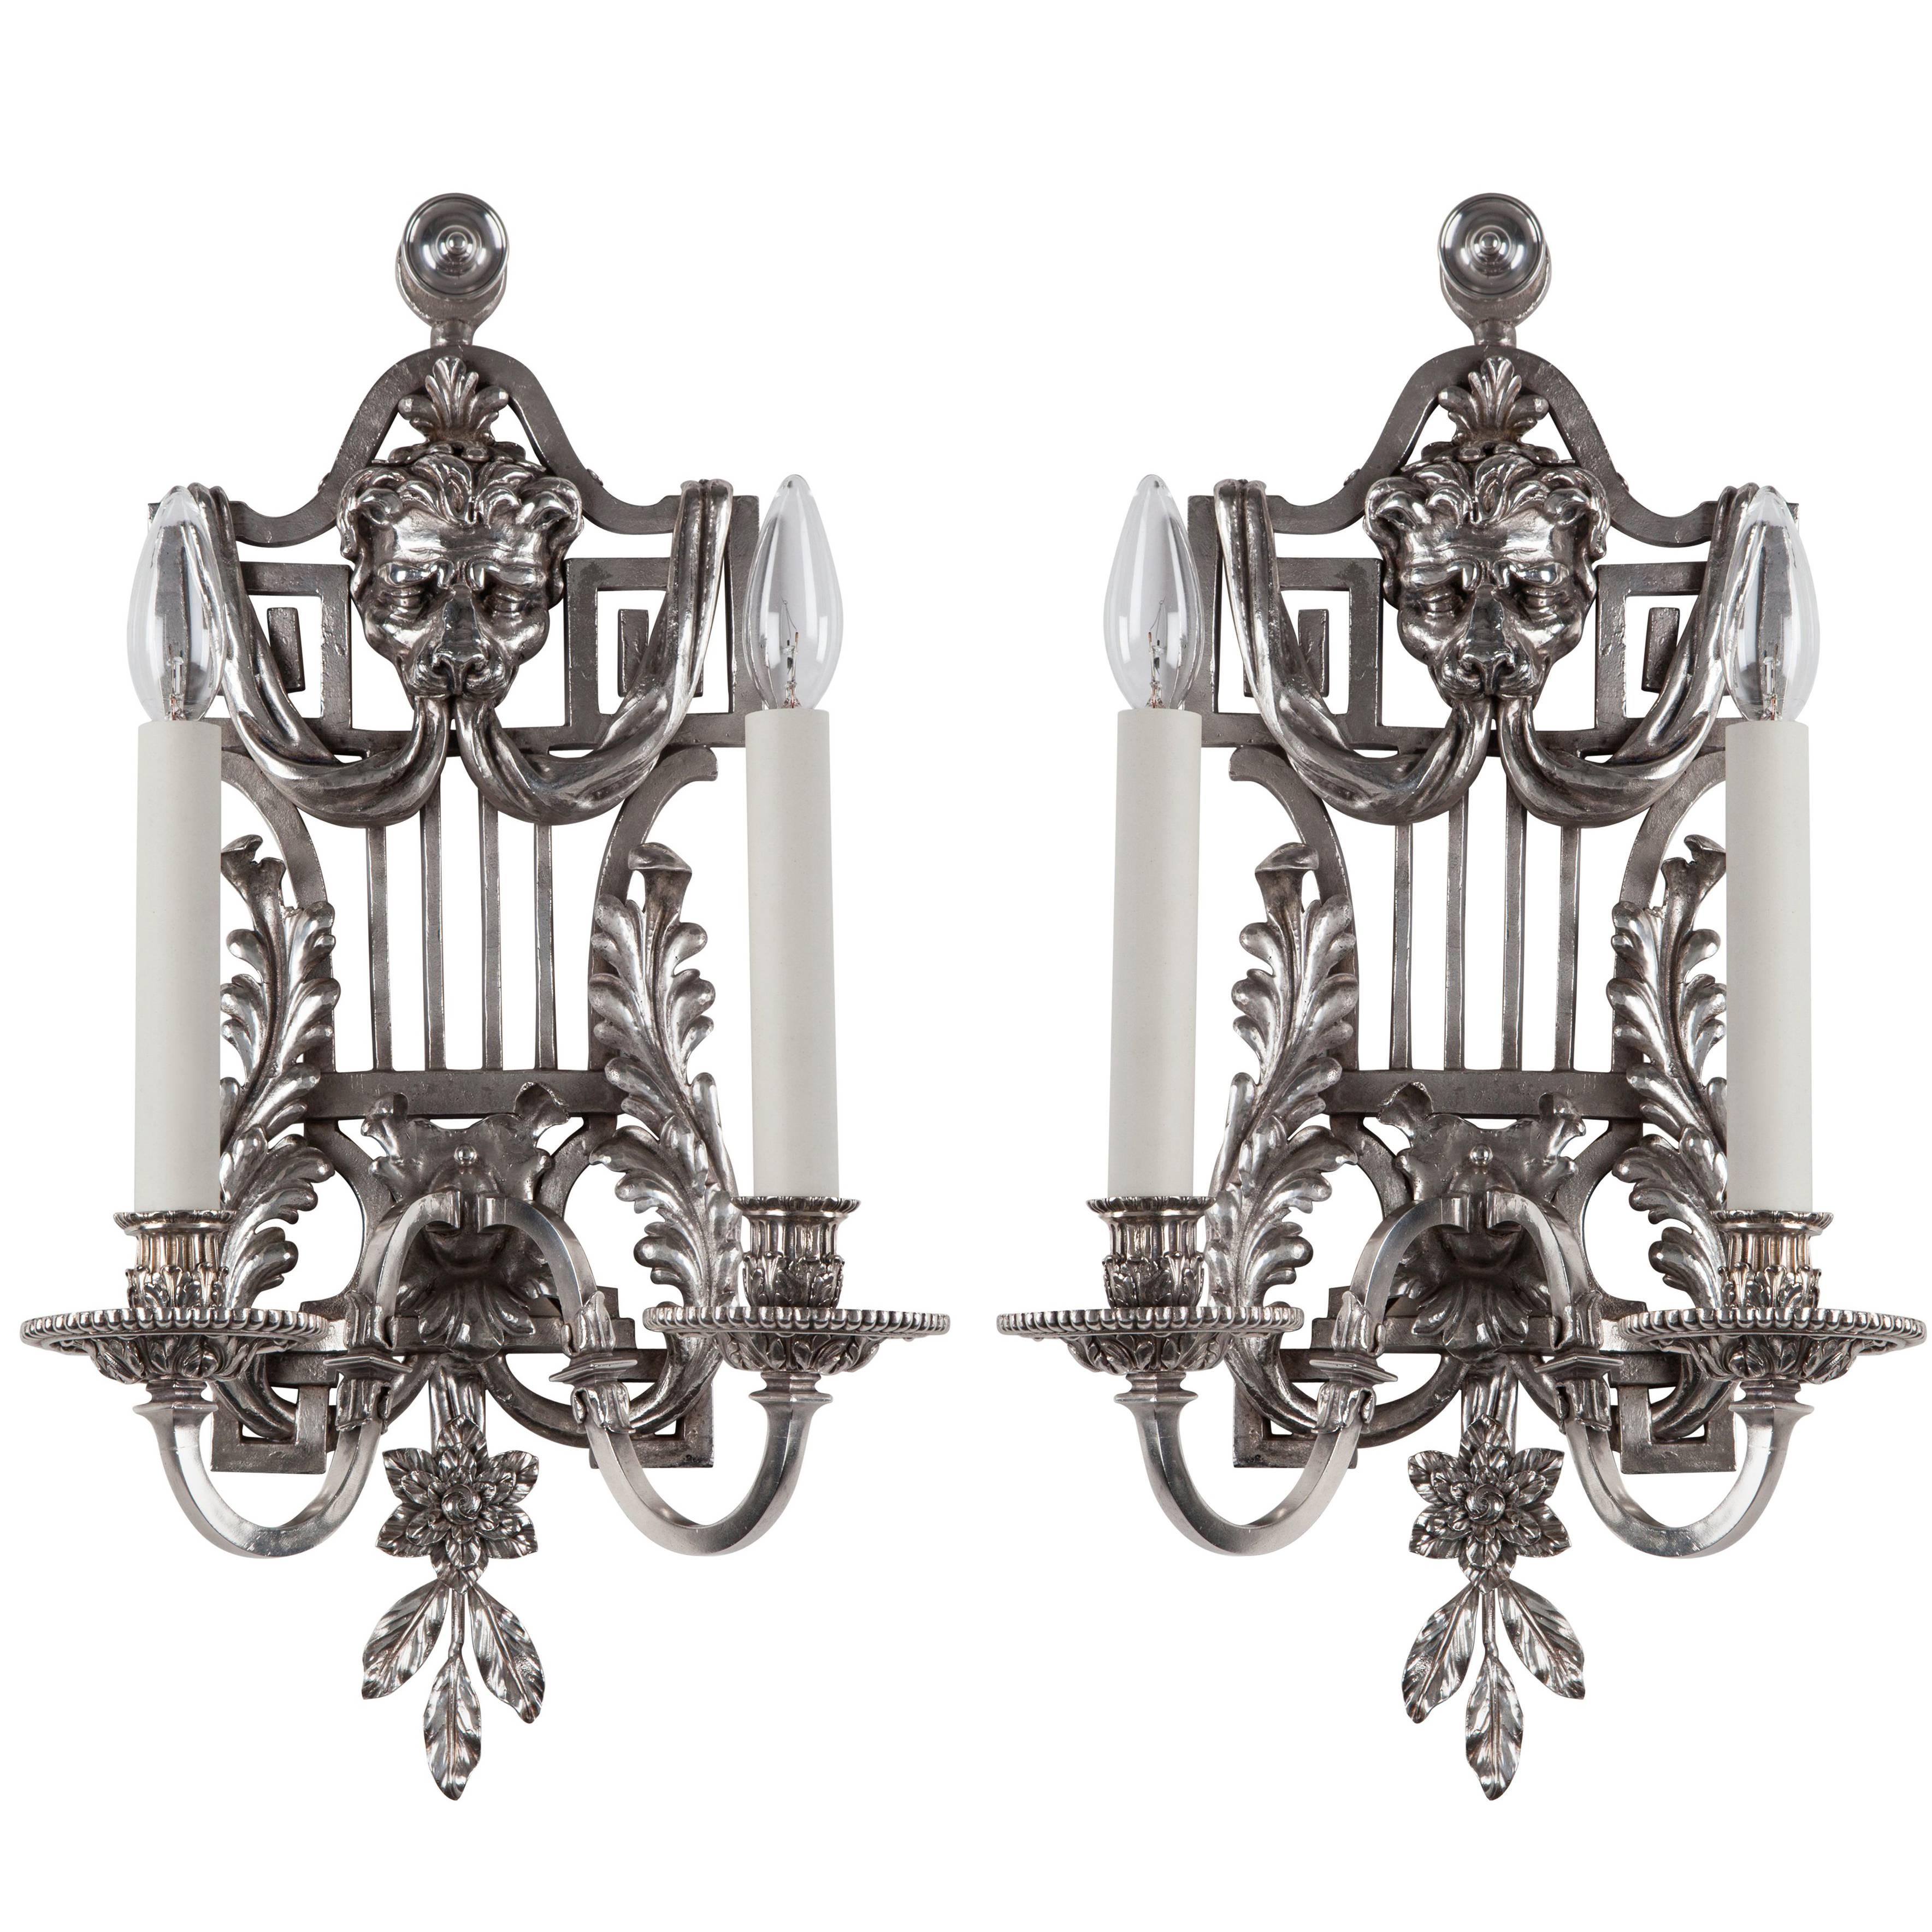 Edward F. Caldwell Silverplate Sconces with Lyre Form Backplates, circa 1900s For Sale